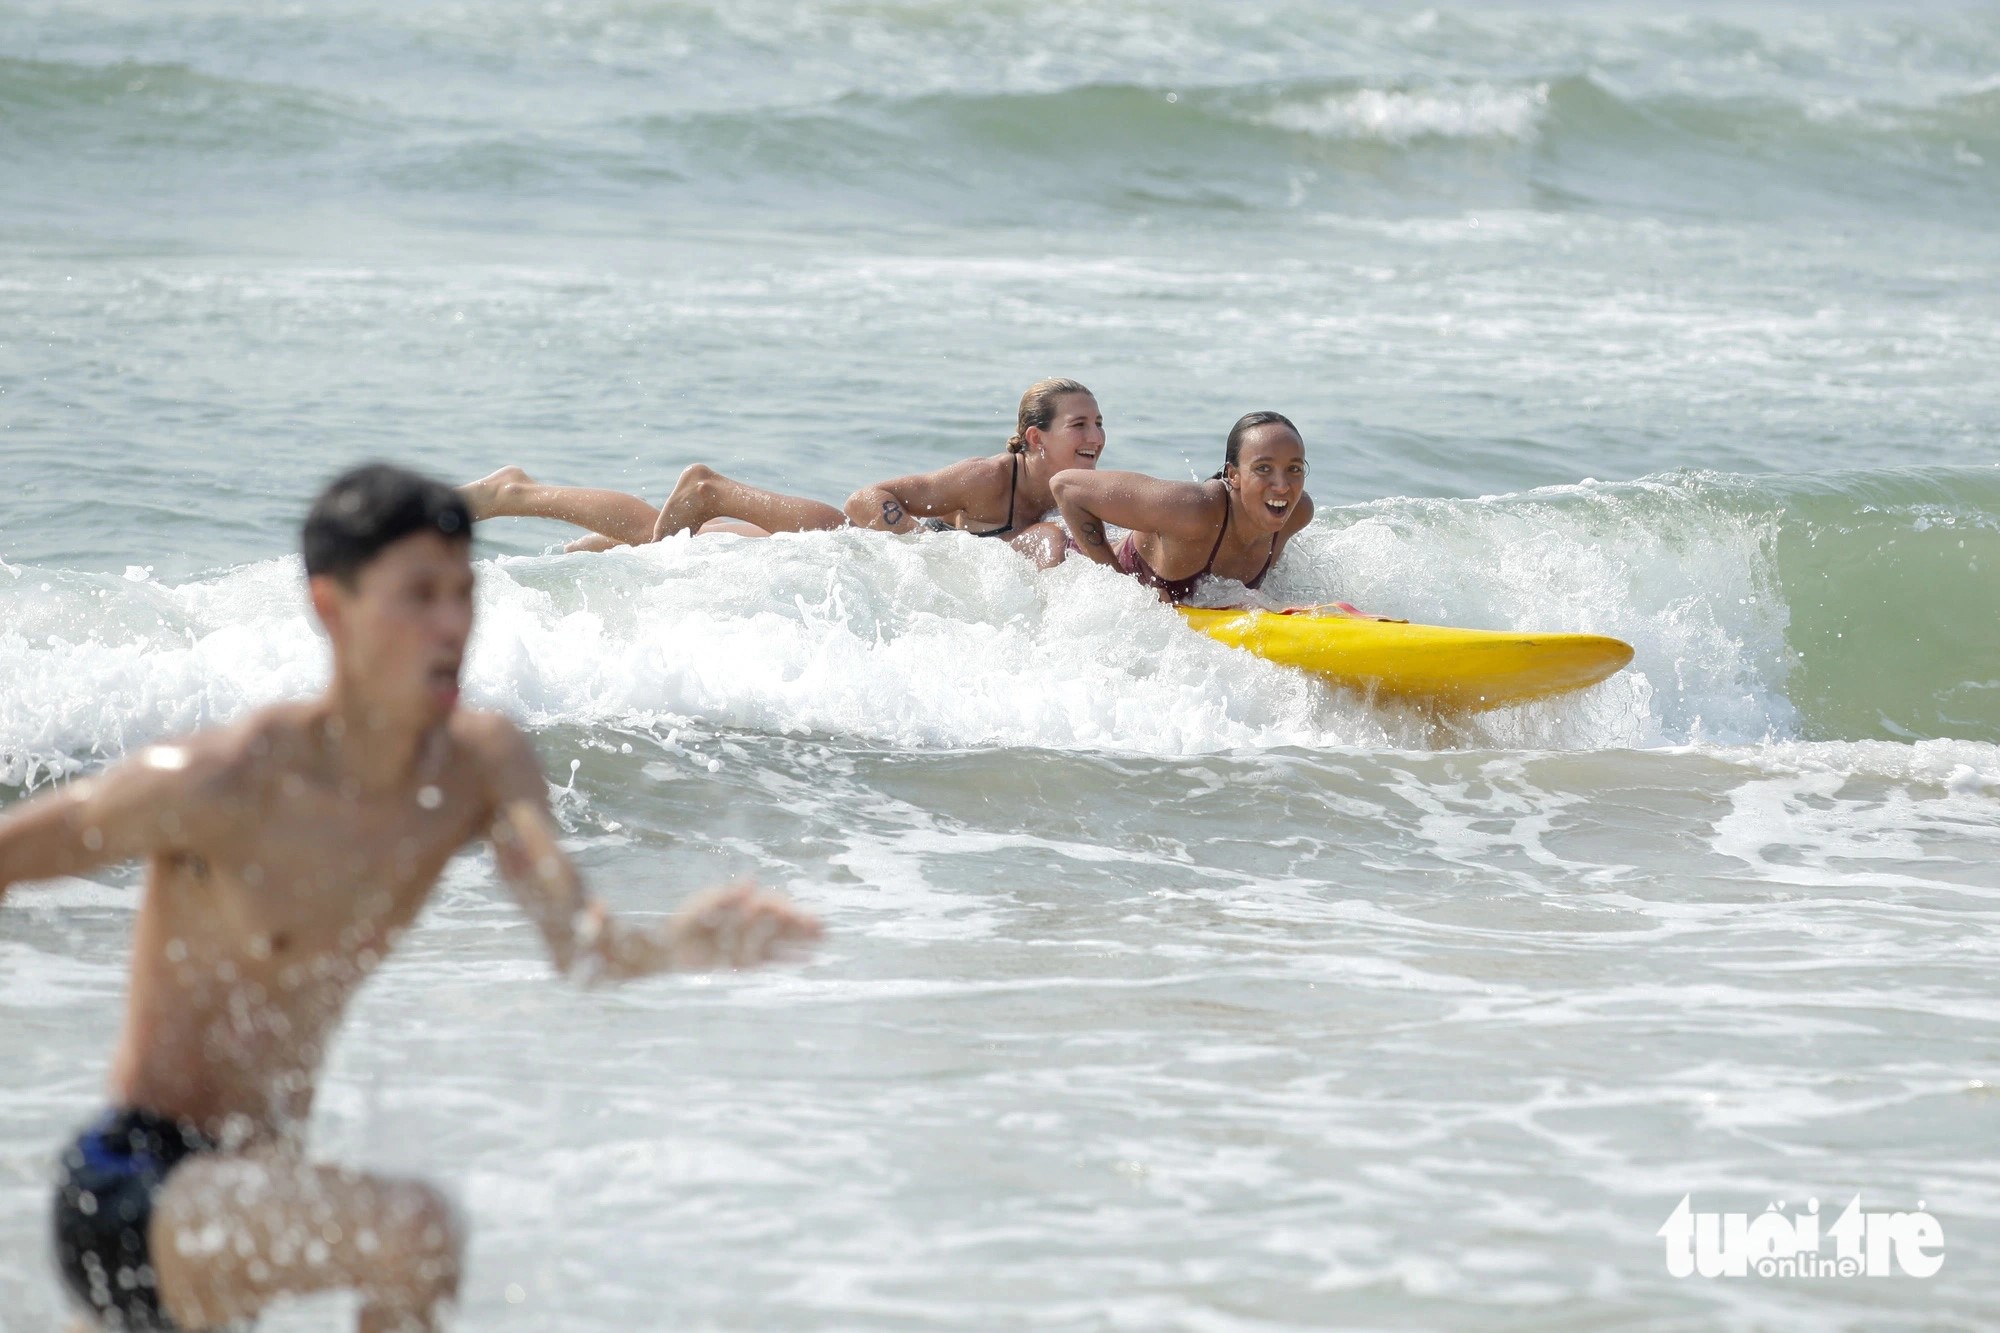 Two Australian female lifeguards bring a drowning victim back to shore. Photo: Doan Nhan / Tuoi Tre